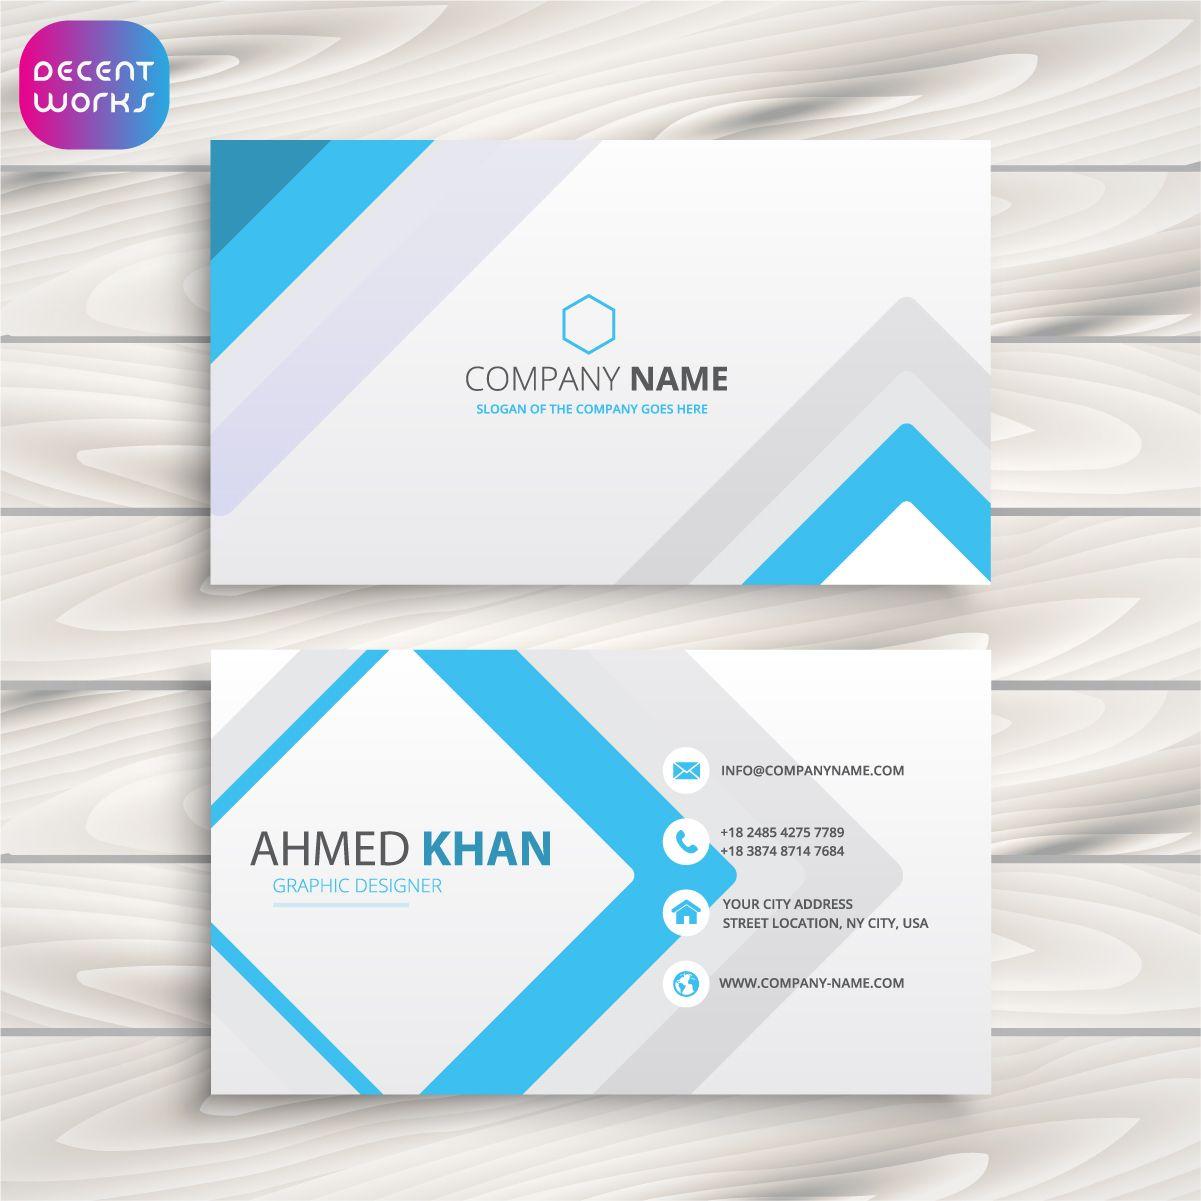 24 Hour Company Logo - 4 logo with business card High quality & Transparent background in ...